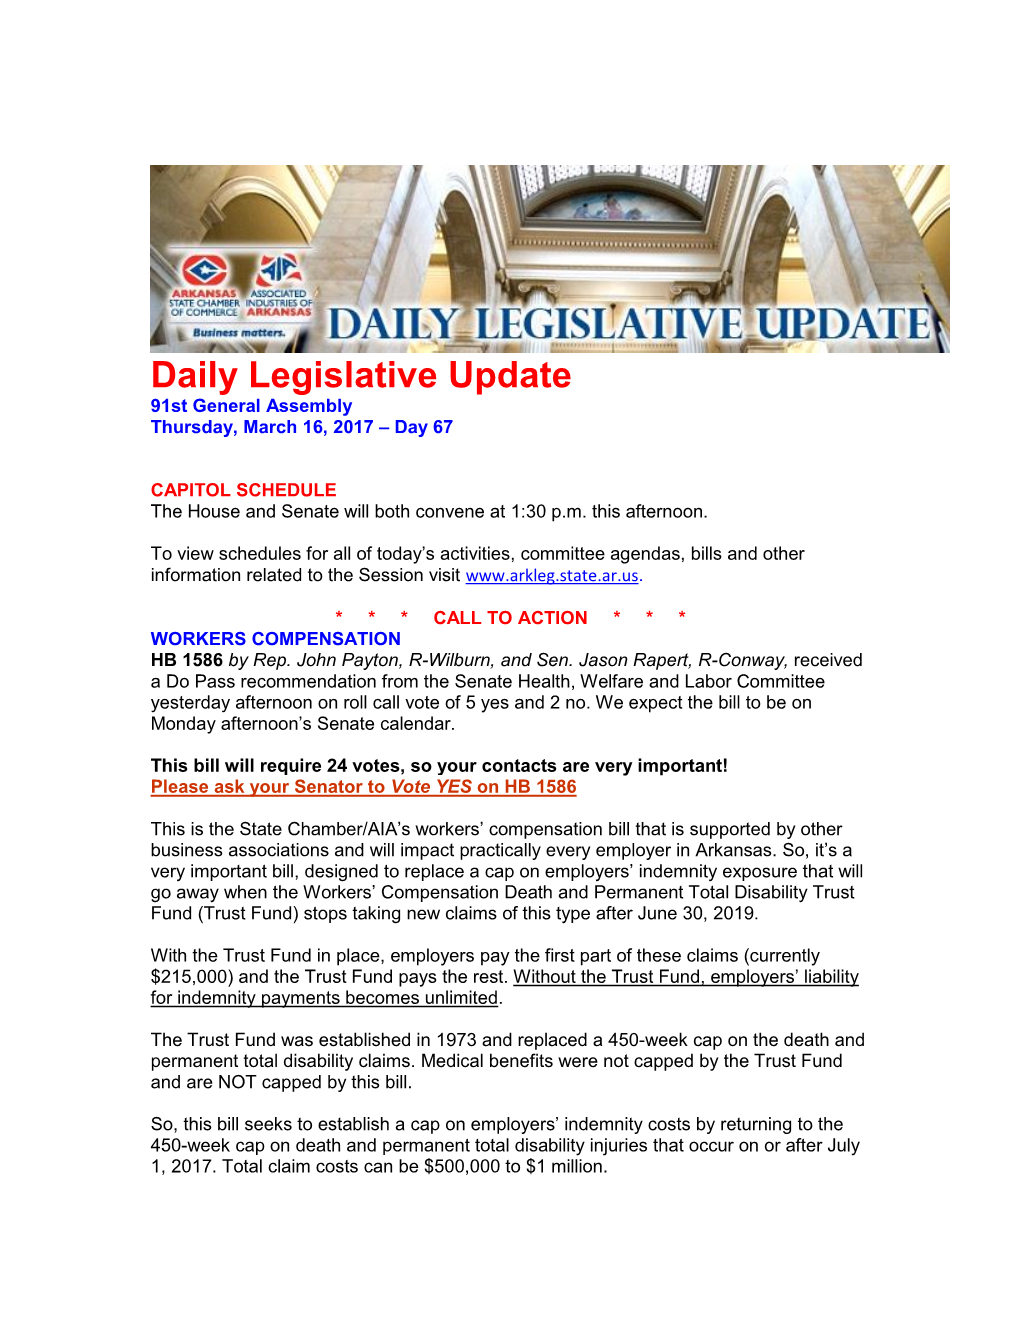 Daily Legislative Update 91St General Assembly Thursday, March 16, 2017 – Day 67